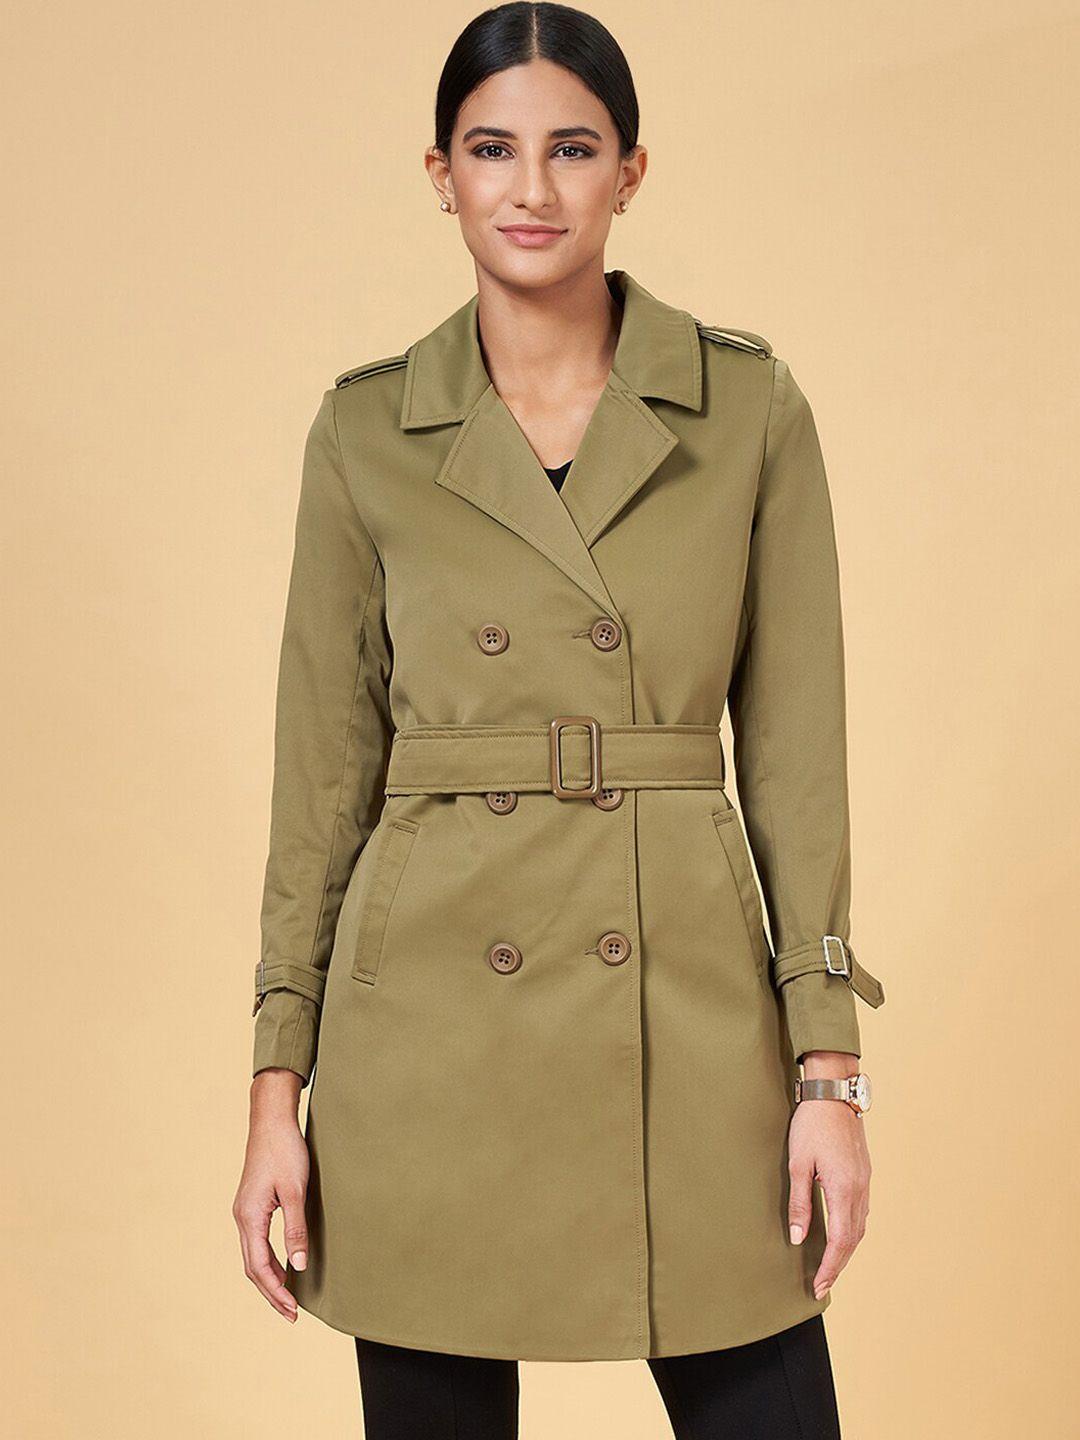 annabelle by pantaloons notched lapel collar trench coat